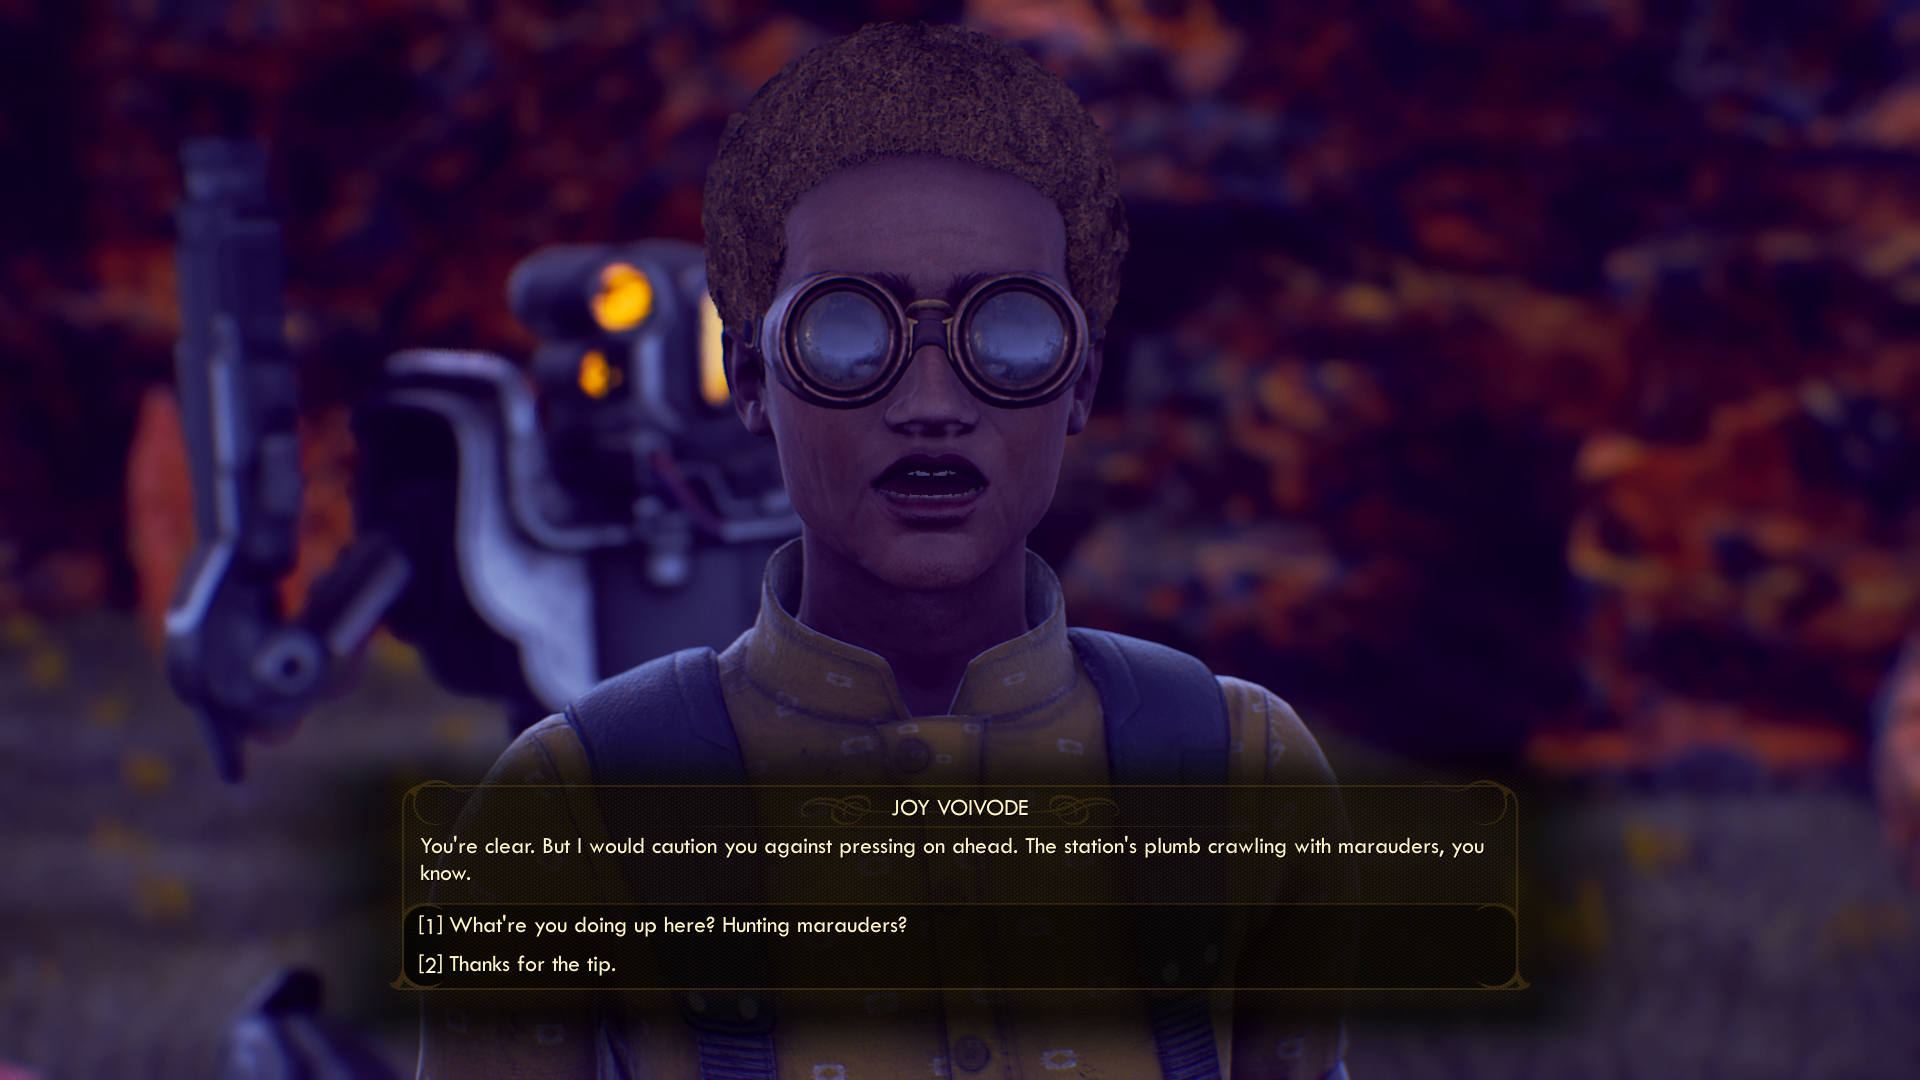 Hiram Blythe, The Outer Worlds Wiki